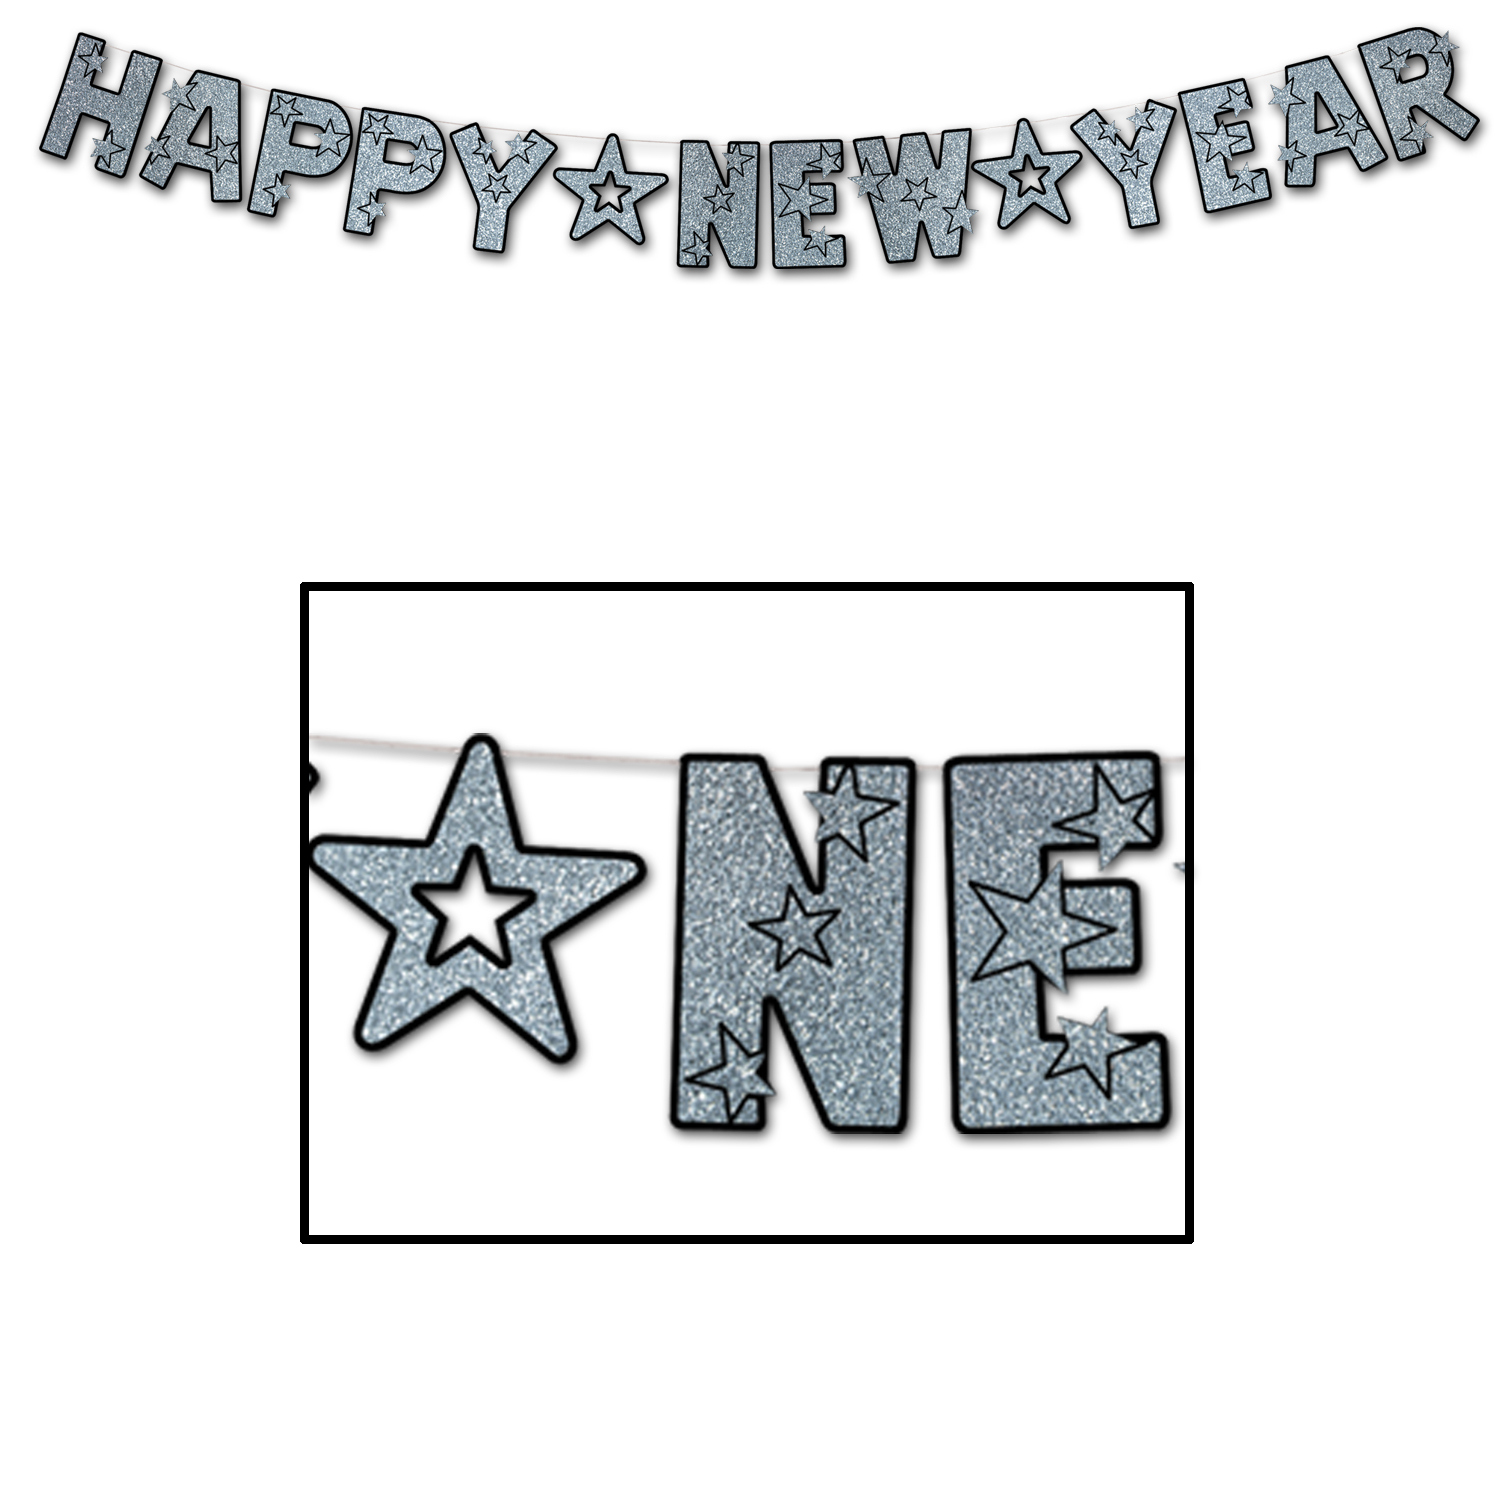 Black Happy New Year streamer with silver glittered lettering.